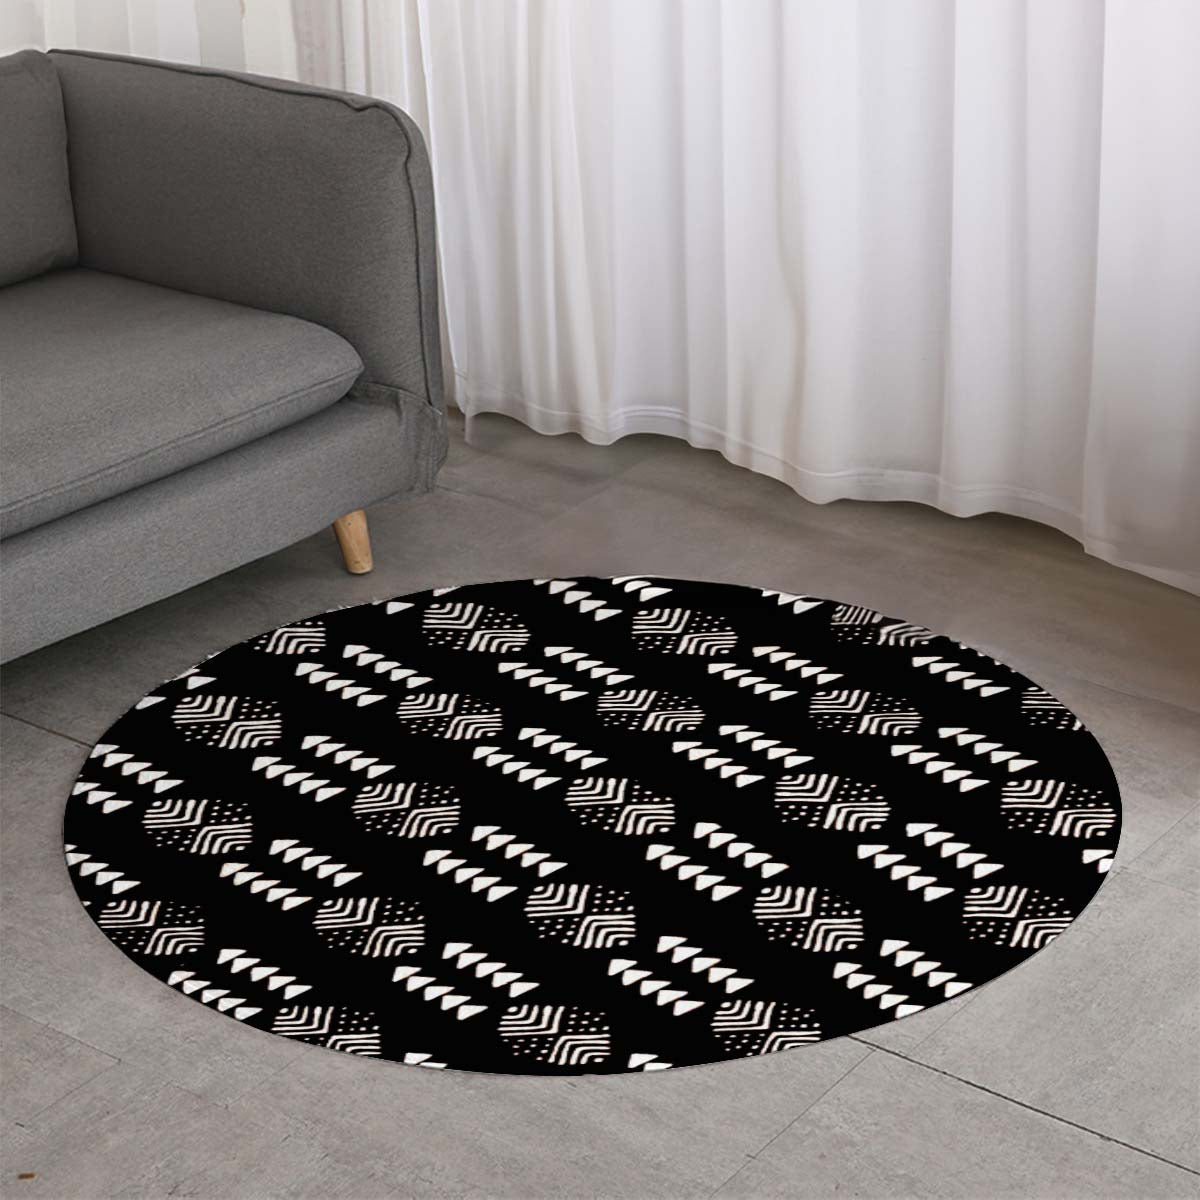 Traditional Round Rug African Tribal Black & White Carpet